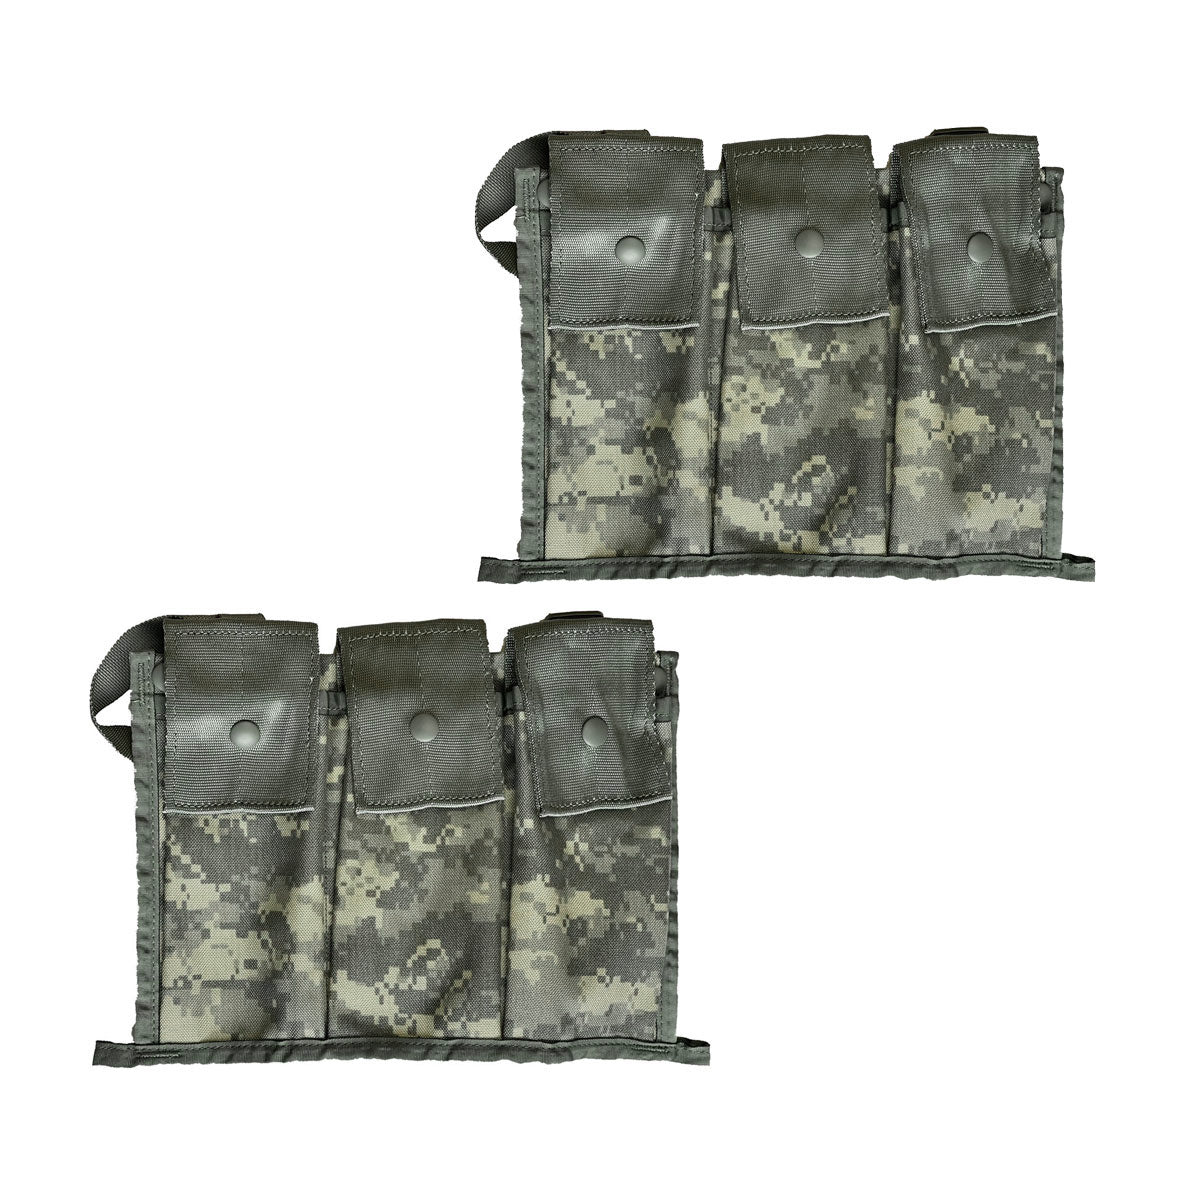 The Molle II Bandoleer ACU Digital Pouch is designed to attach to the inside of the Molle II Rucksack